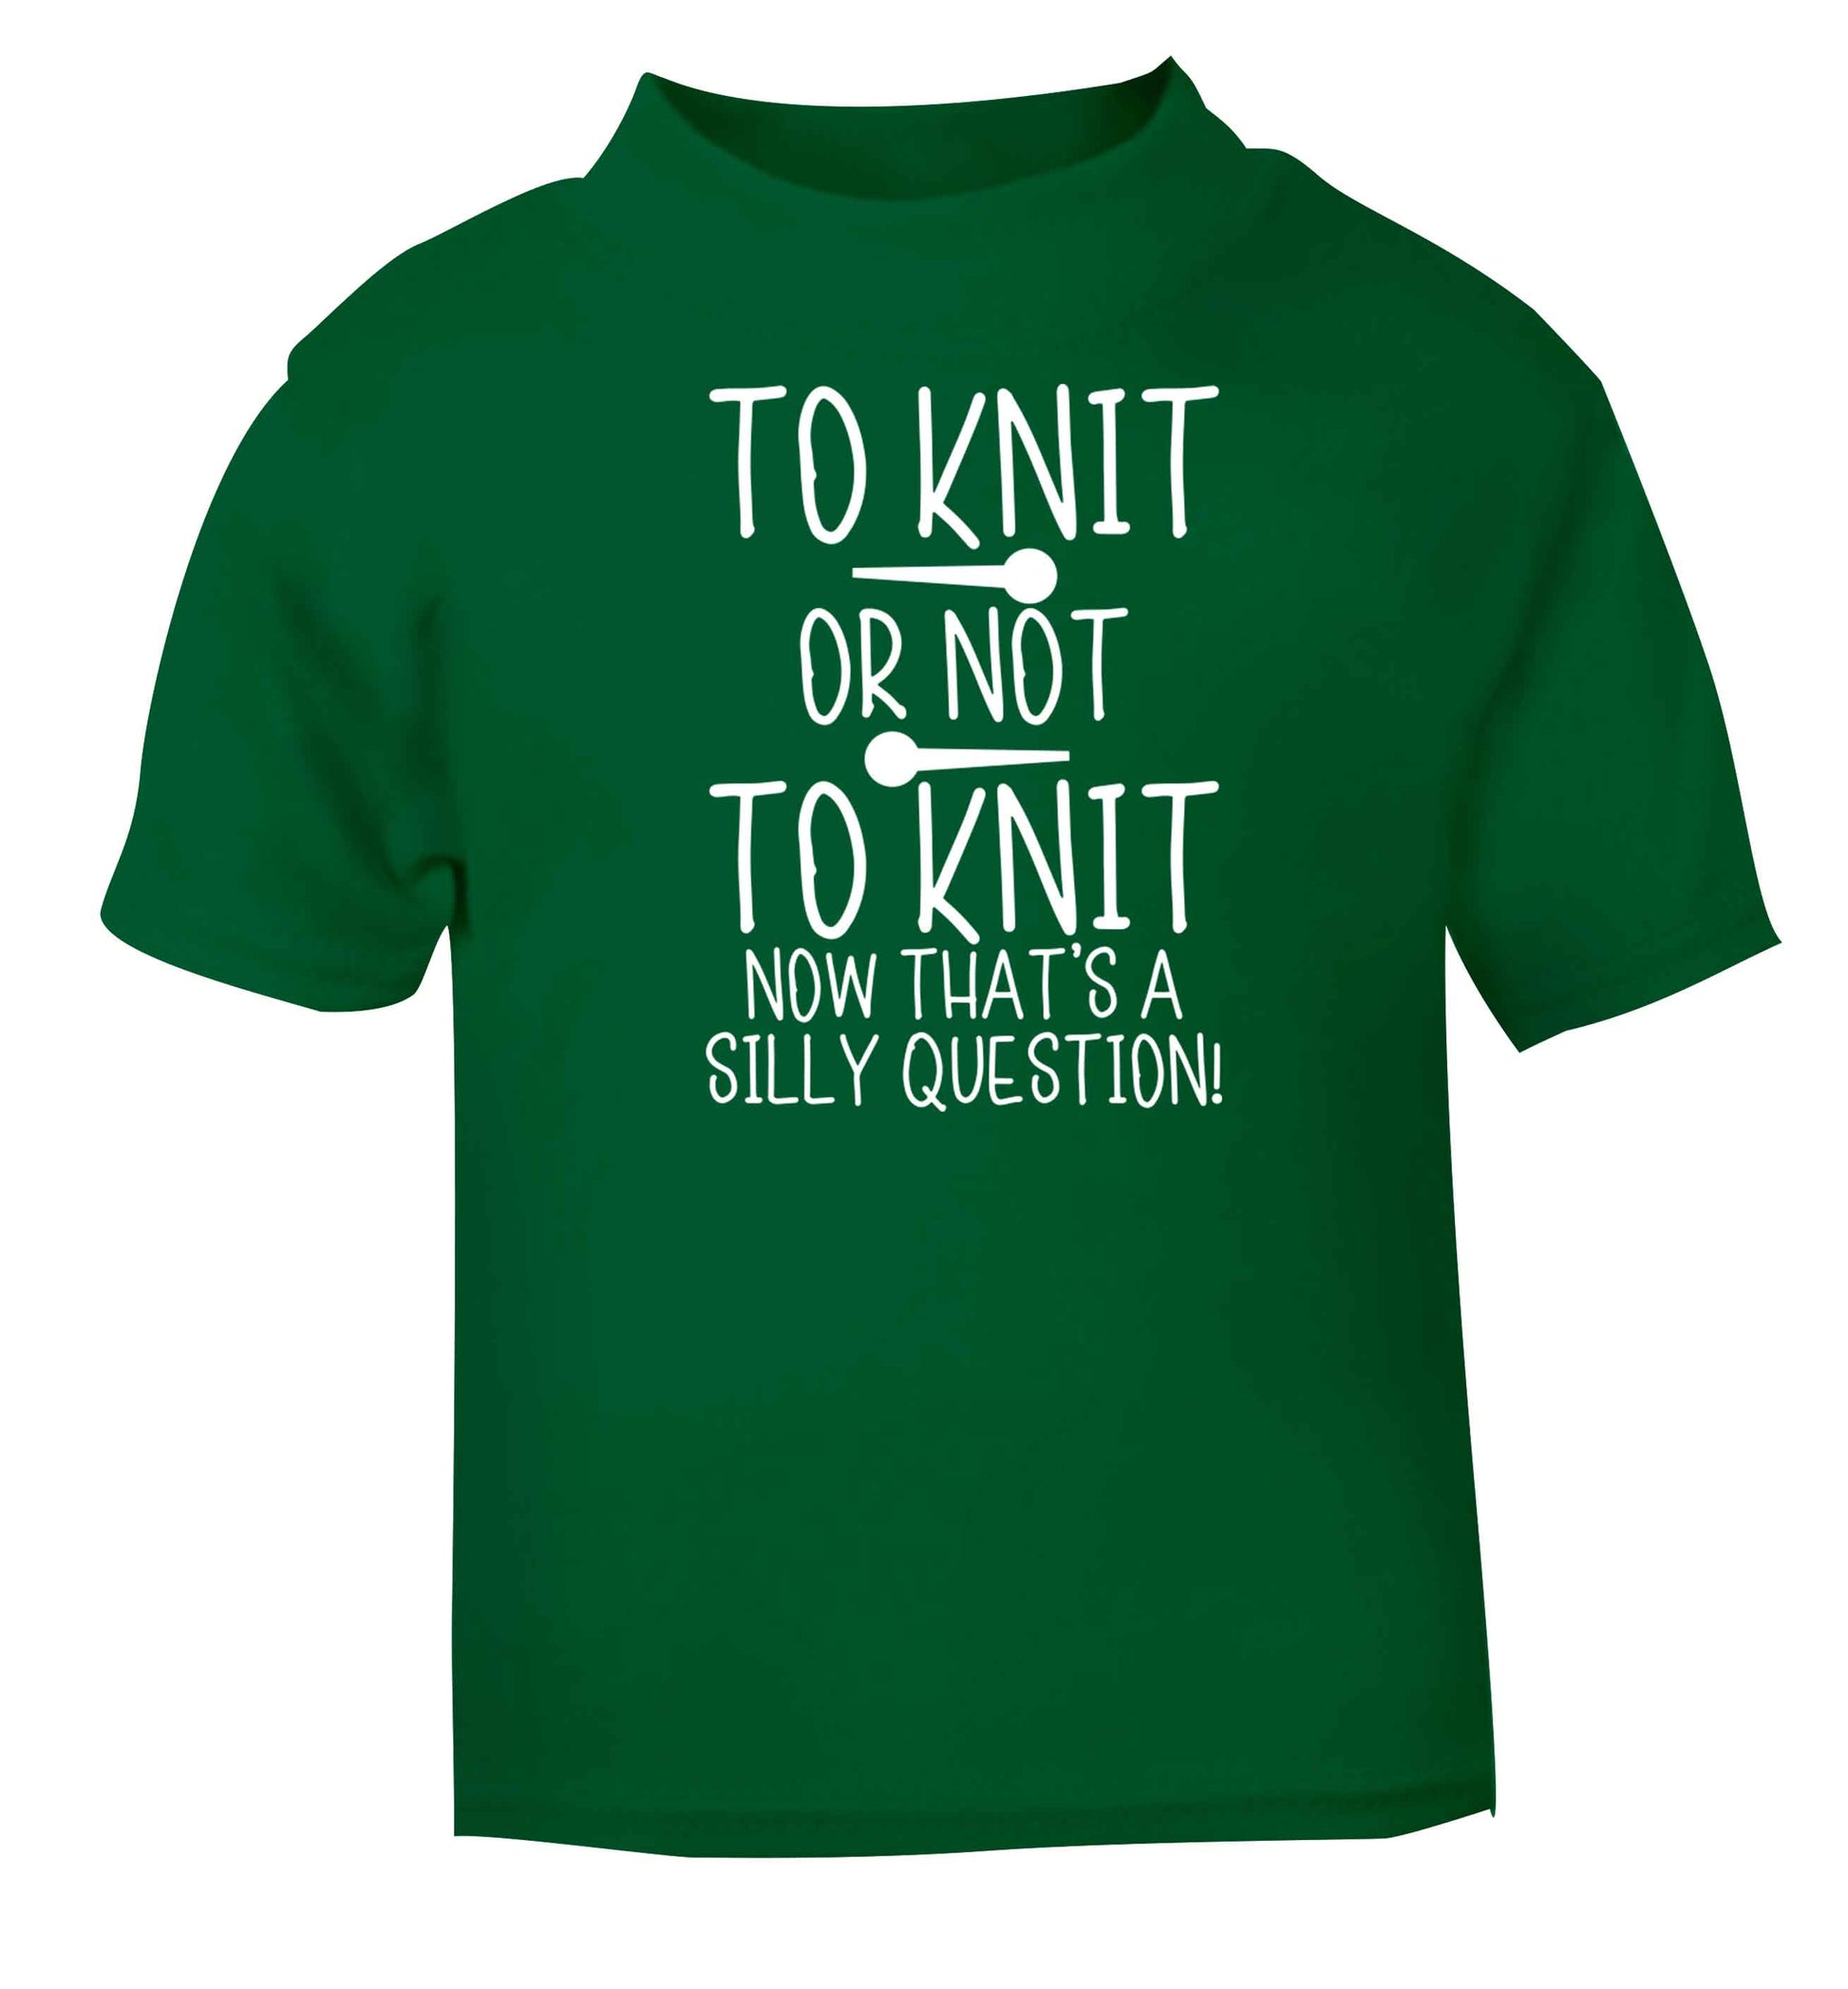 To knit or not to knit now that's a silly question green baby toddler Tshirt 2 Years